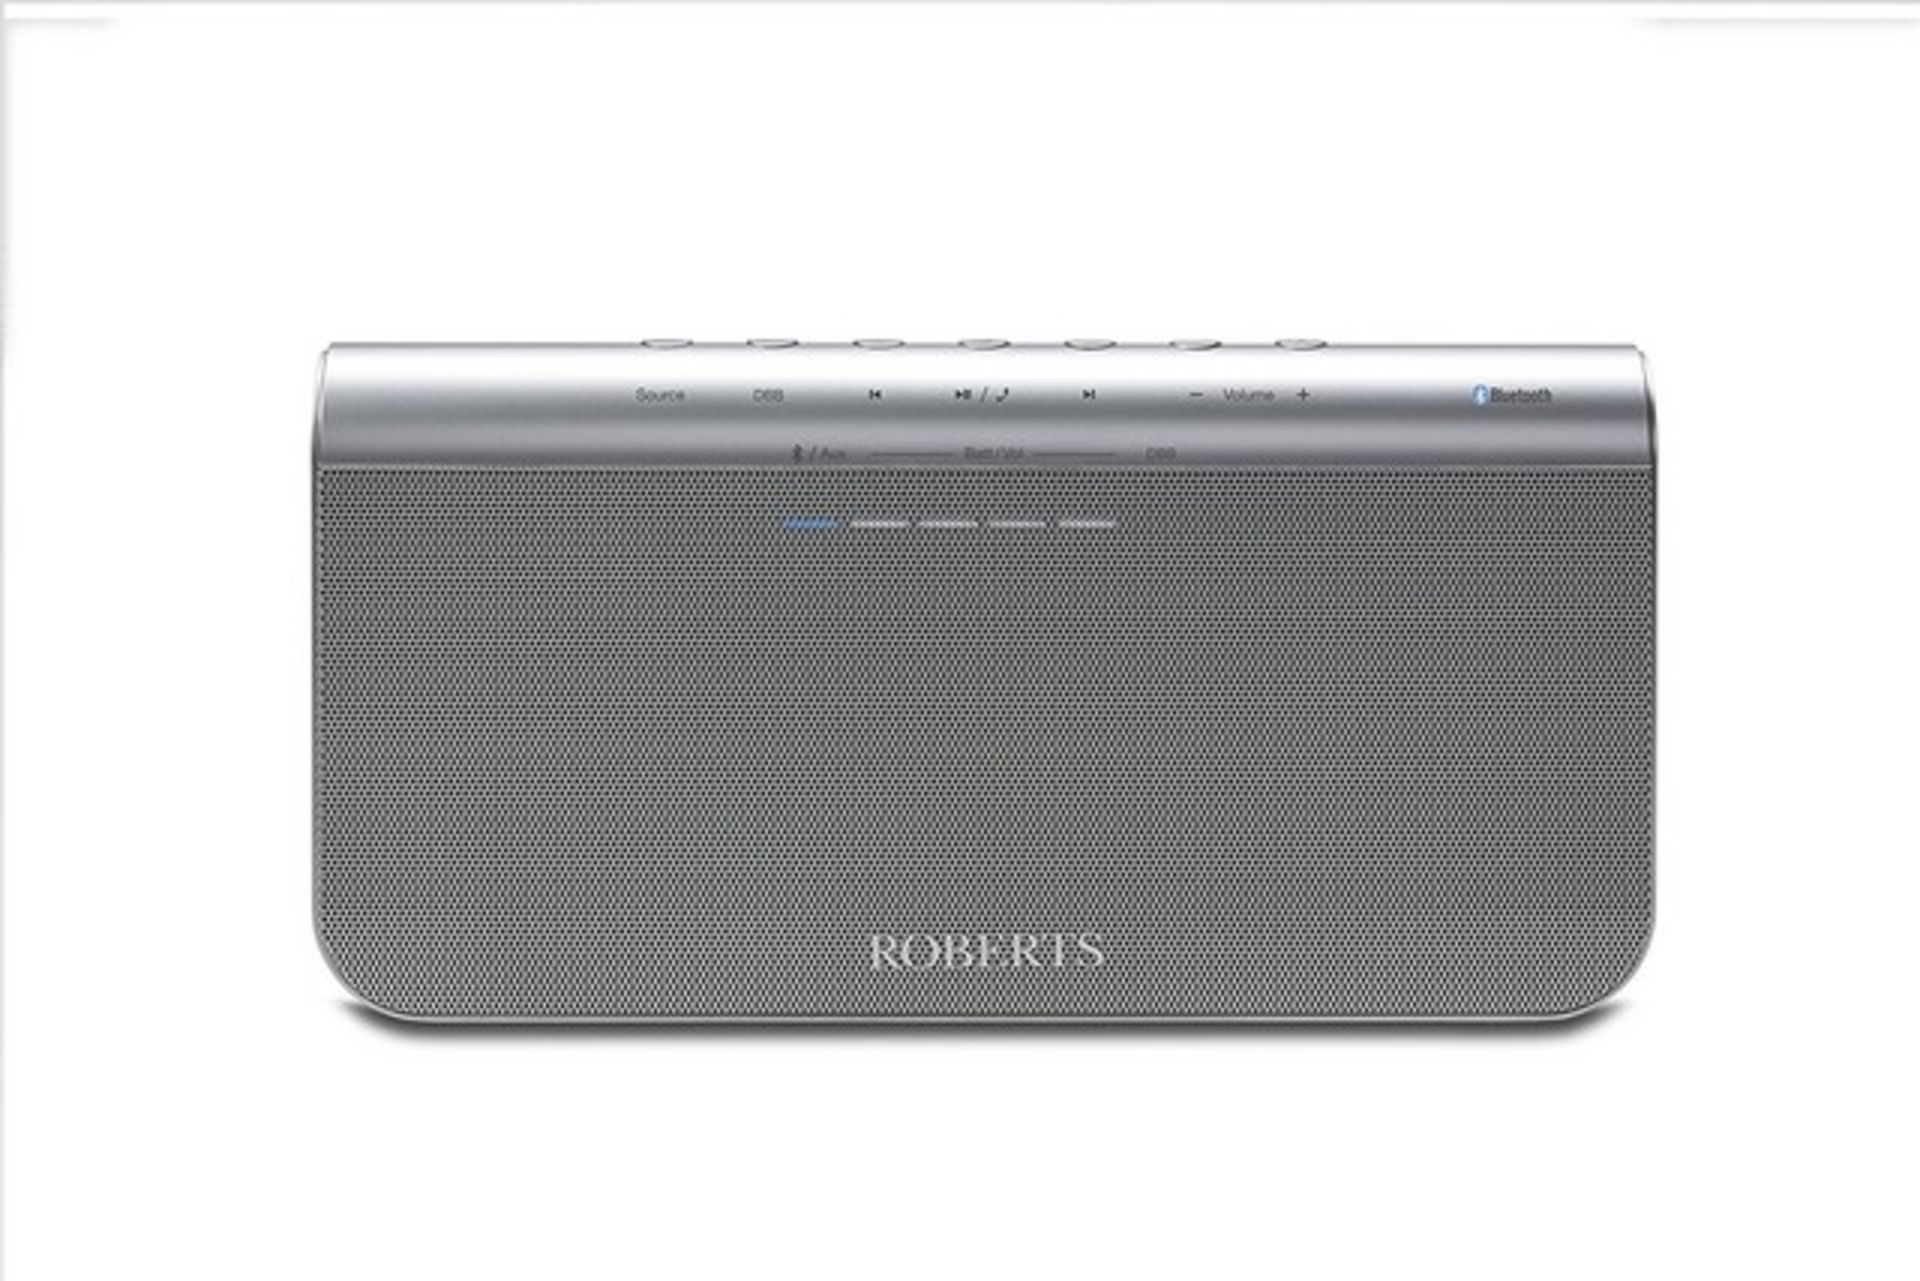 V Brand New Roberts BluPad Radio Portable Speaker With Built In Rechargable Battery And Leather - Image 5 of 6